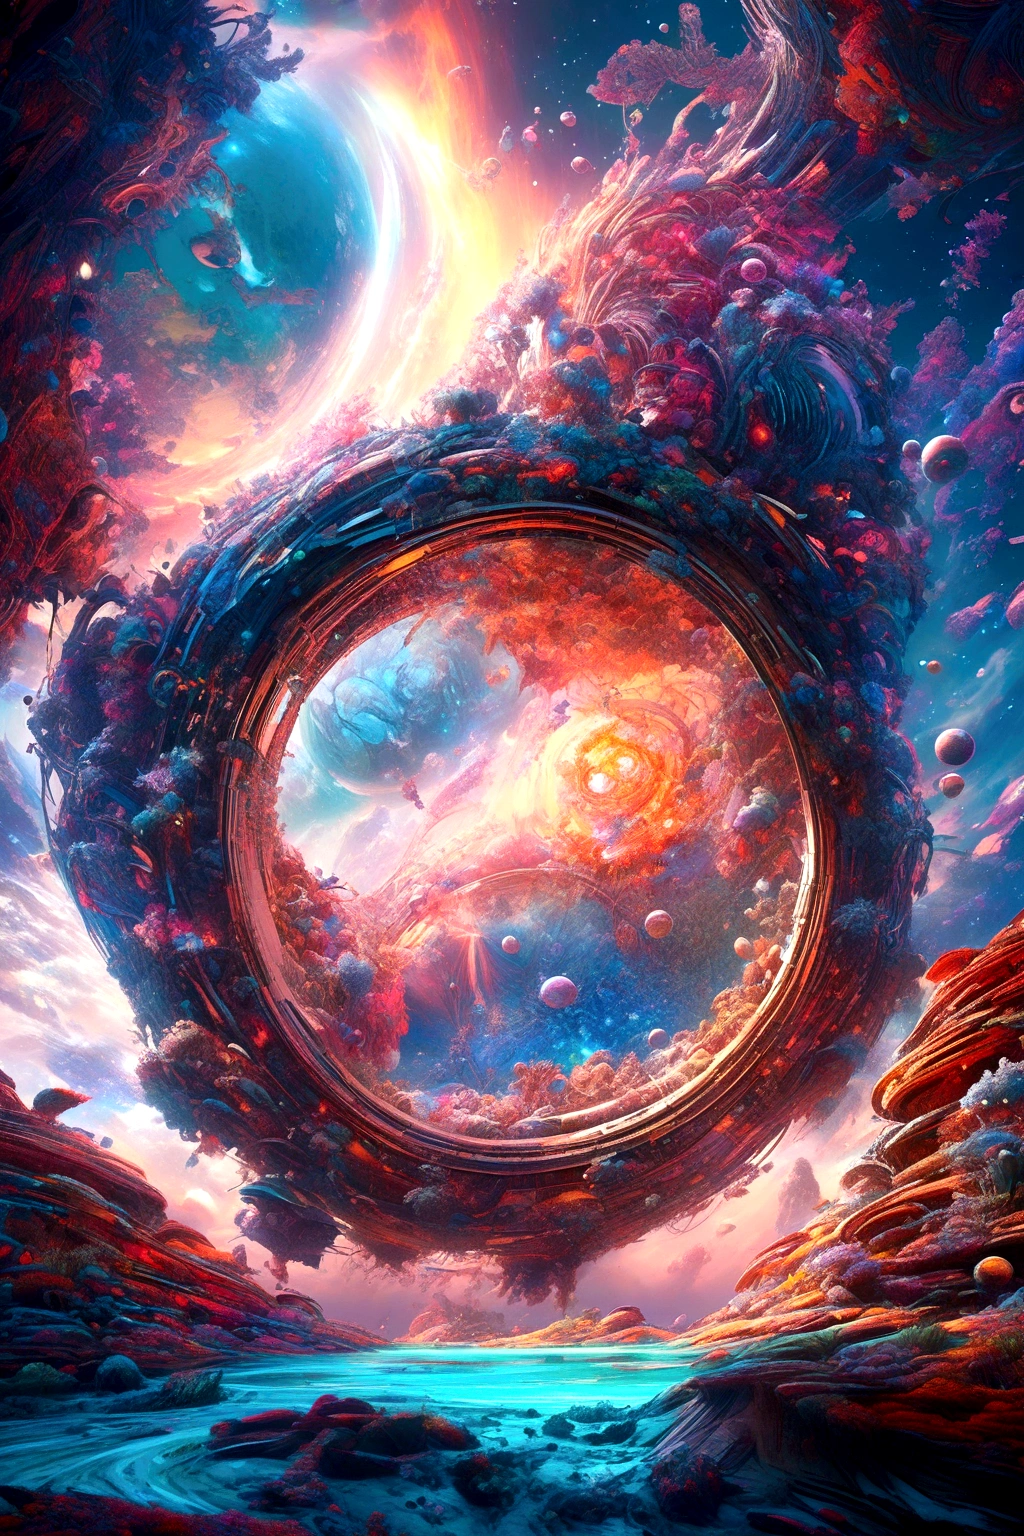 a highly detailed, cinematic illustration of a vast, otherworldly alien planet, enveloped in swirling cosmic winds, dramatic lighting, dramatic clouds, strange alien architecture, glowing energy fields, floating islands, mysterious alien flora and fauna, intricate details, vibrant colors, photorealistic, 8k, concept art style